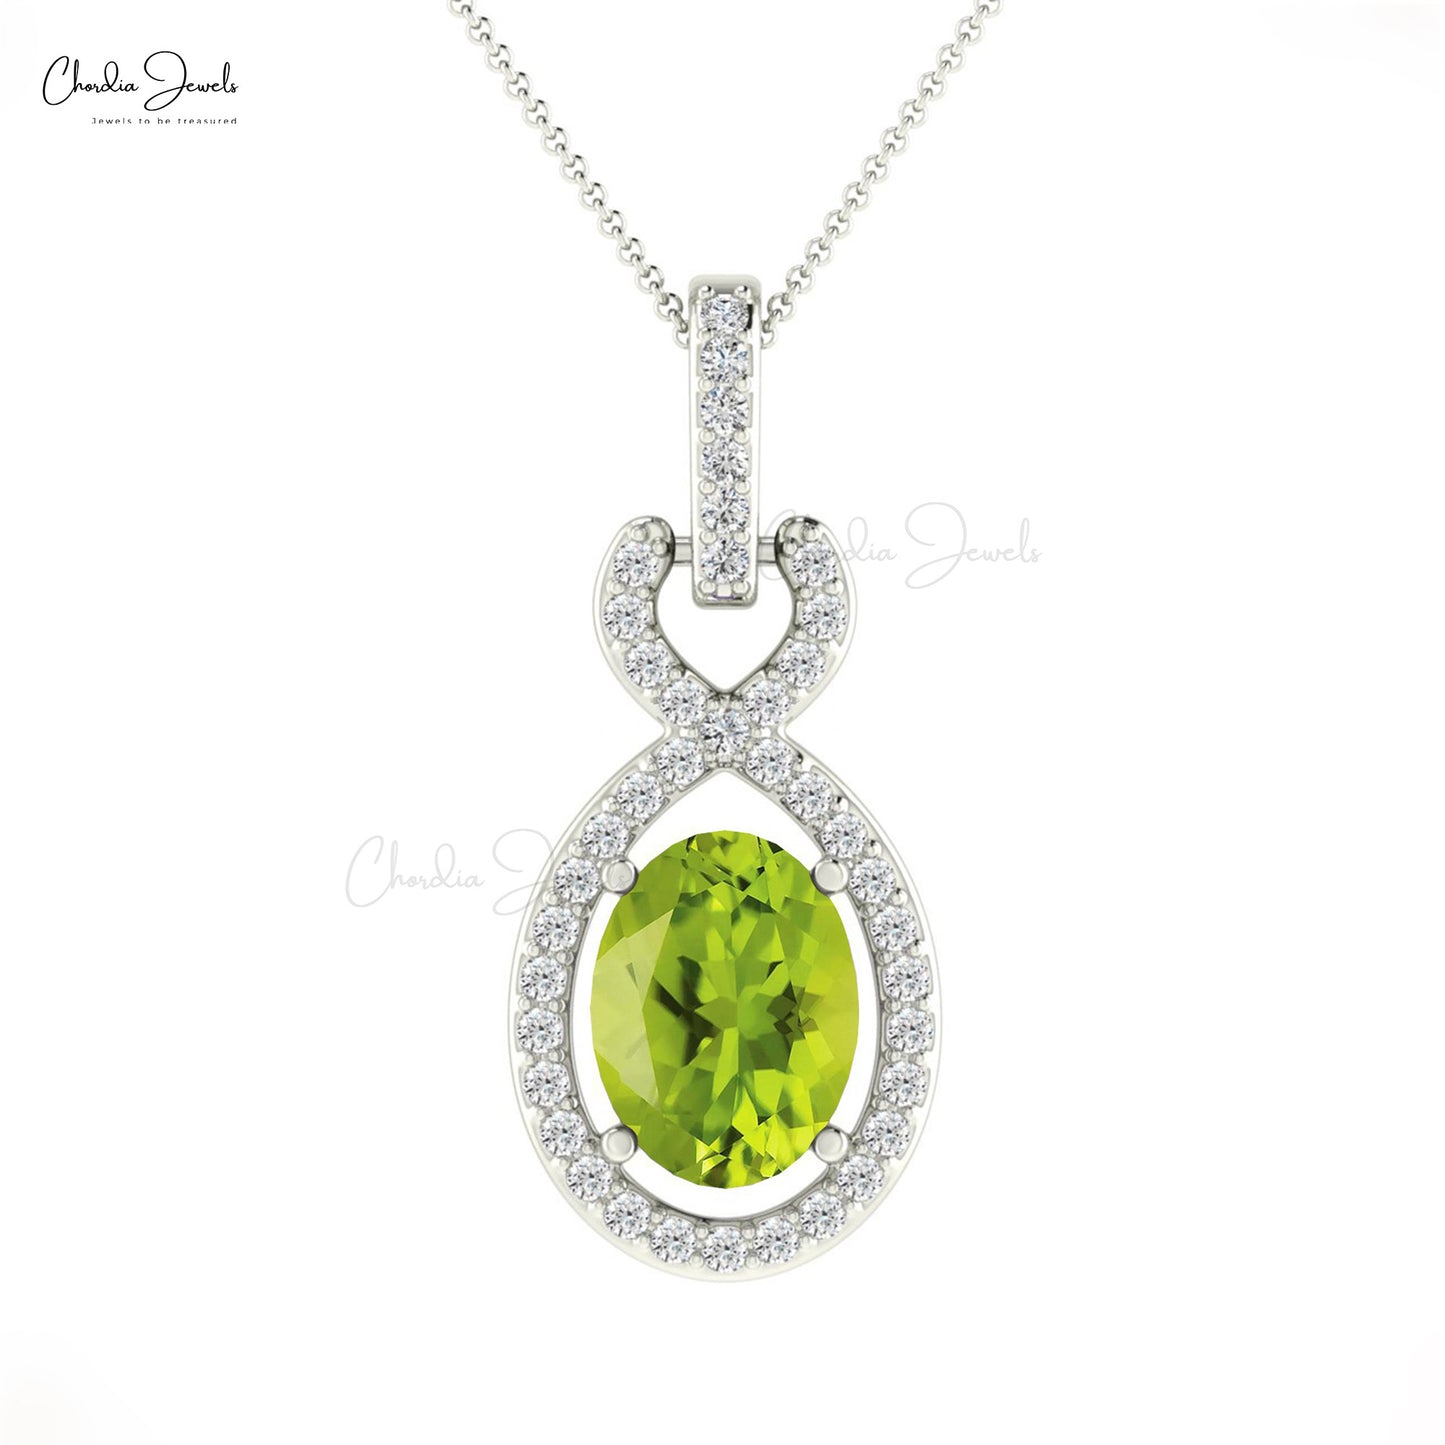 Load image into Gallery viewer, New Light Luxury Female Personality Genuine Diamond Halo Pendant Necklace Green Peridot Gemstone Solitaire Pendant 14k Real Gold Fine Jewelry For Bridesmaid Gift
